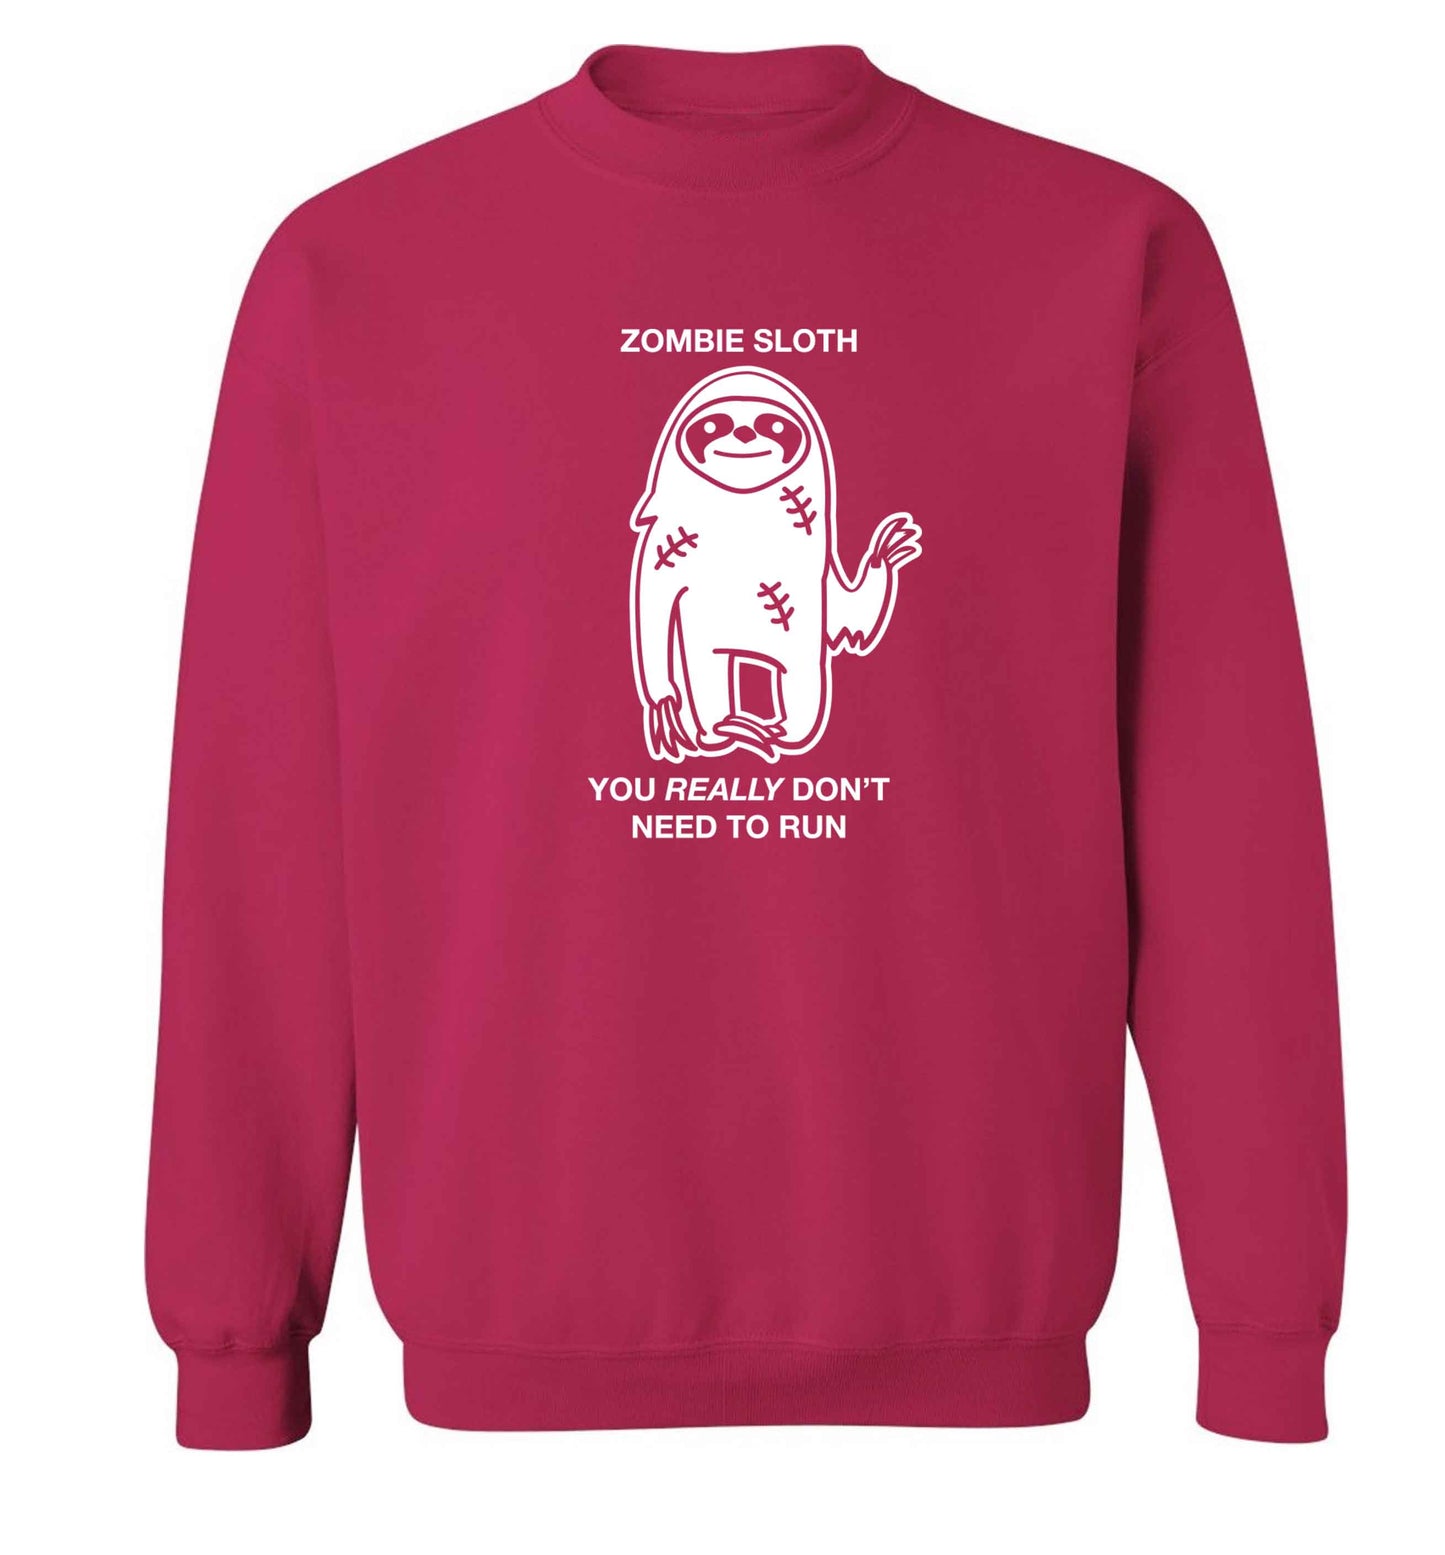 Zombie sloth you really don't need to run adult's unisex pink sweater 2XL